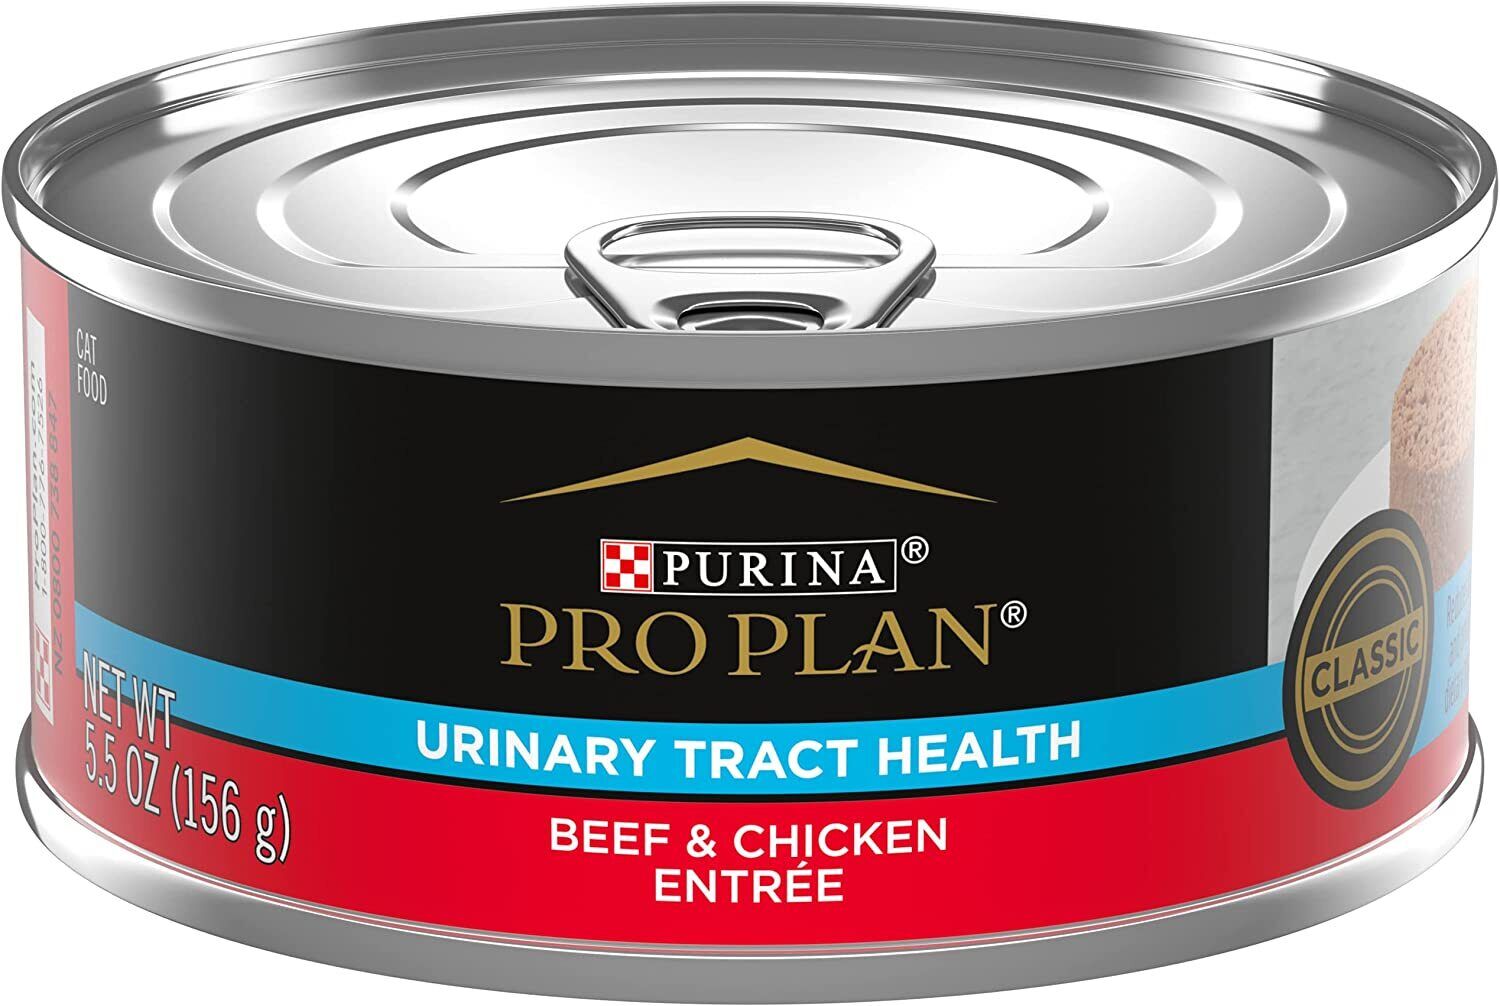 Purina Pro Plan Urinary Tract Health Beef & Chicken Entrée Wet Cat Food 5.5OZ